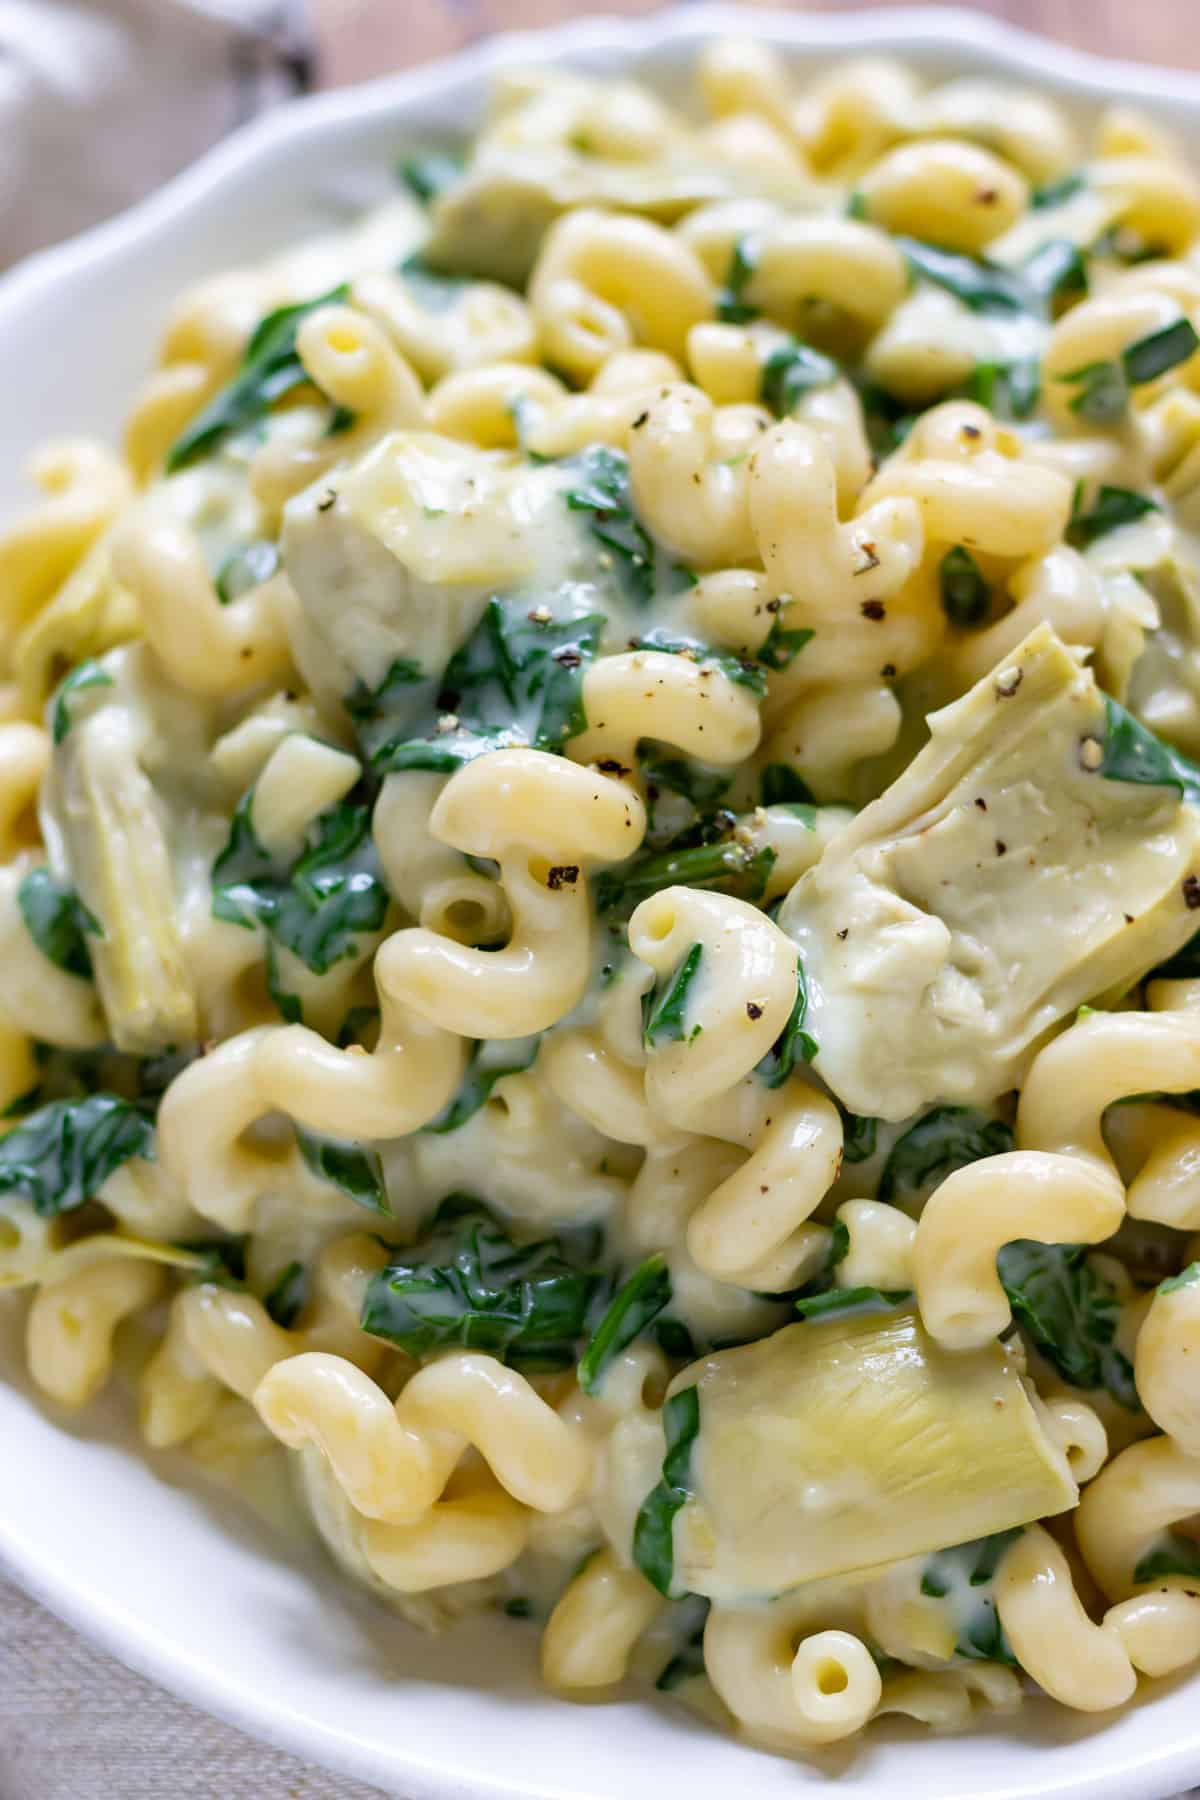 Close up of a plate of pasta with spinach and artichokes.